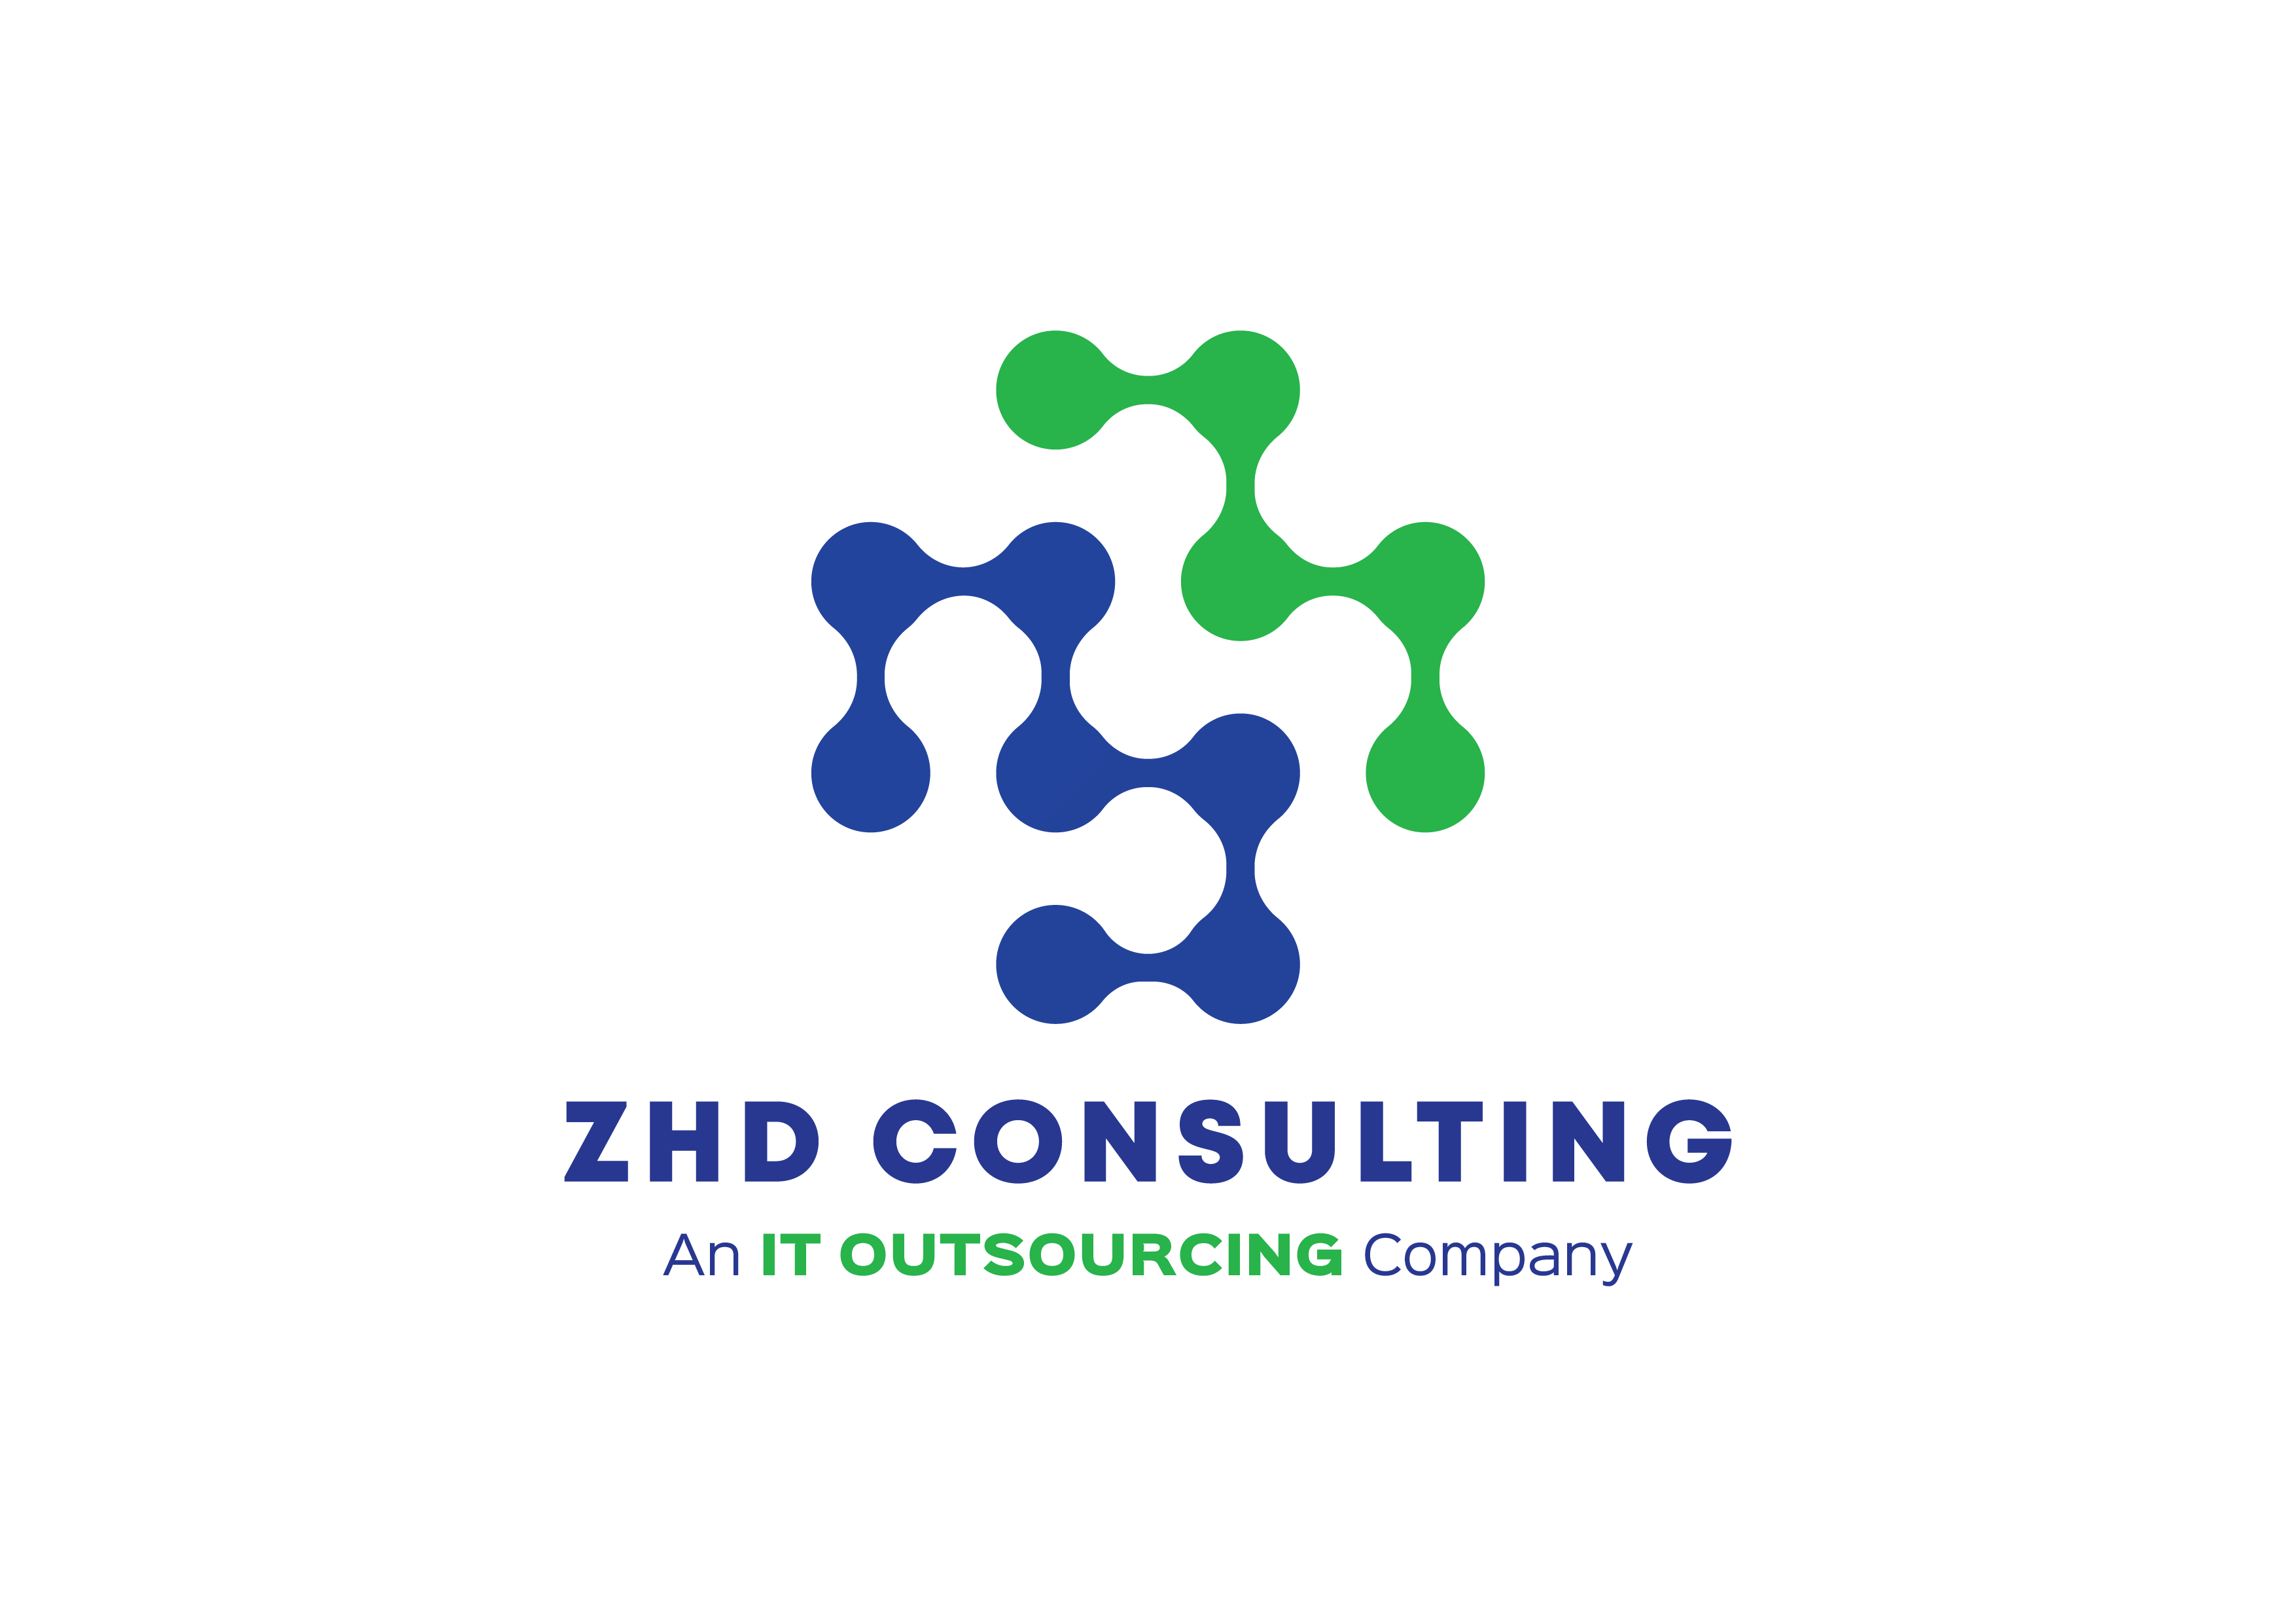 ZHD Consulting